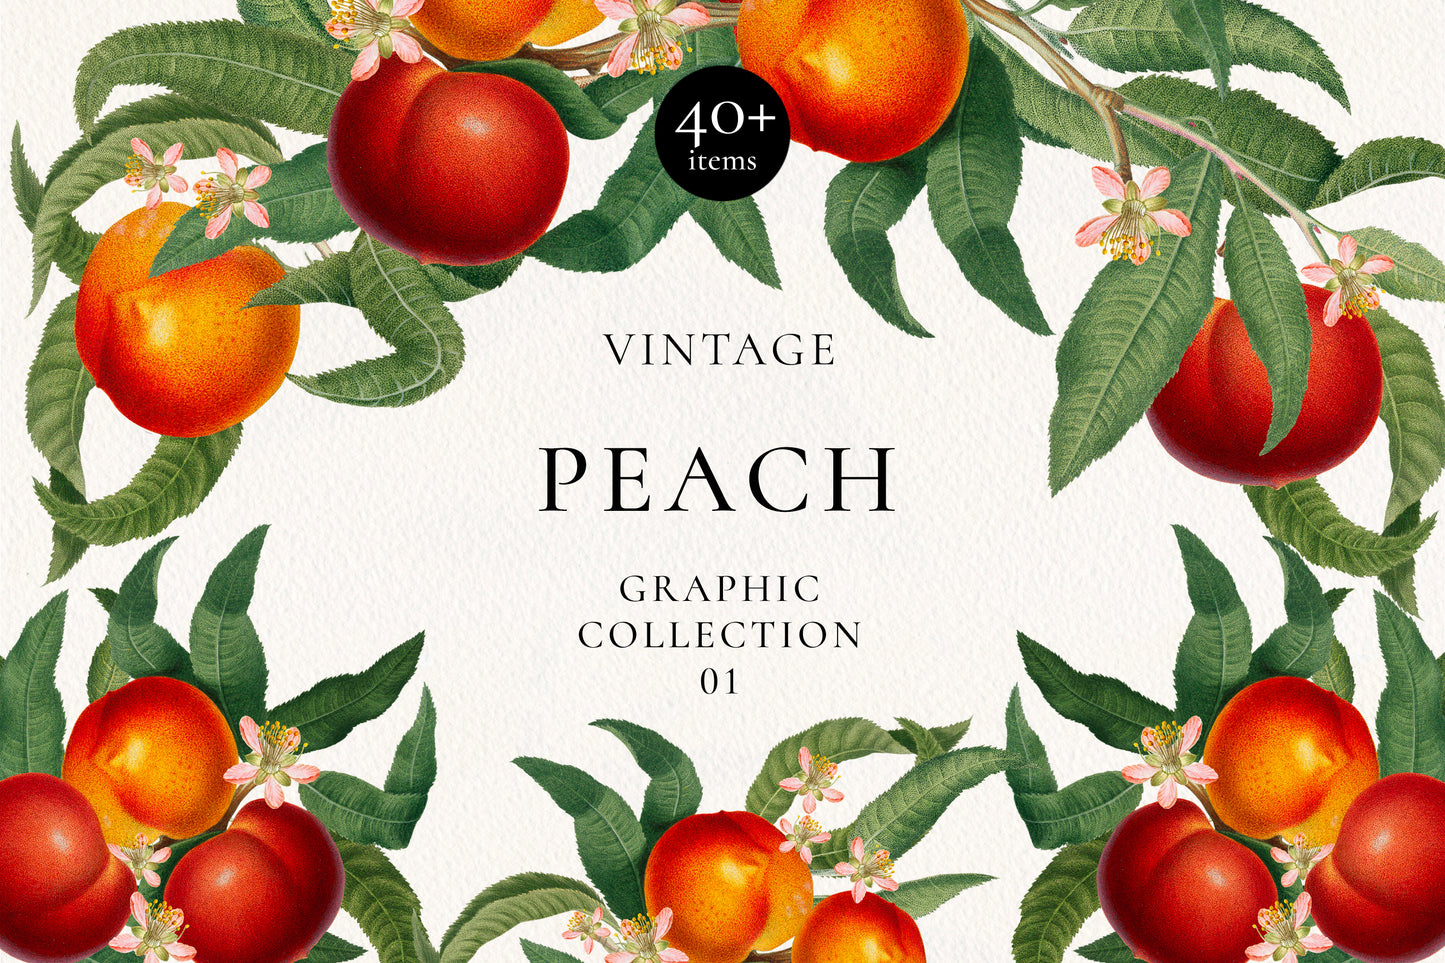 VINTAGE PEACH Graphic Collection #01